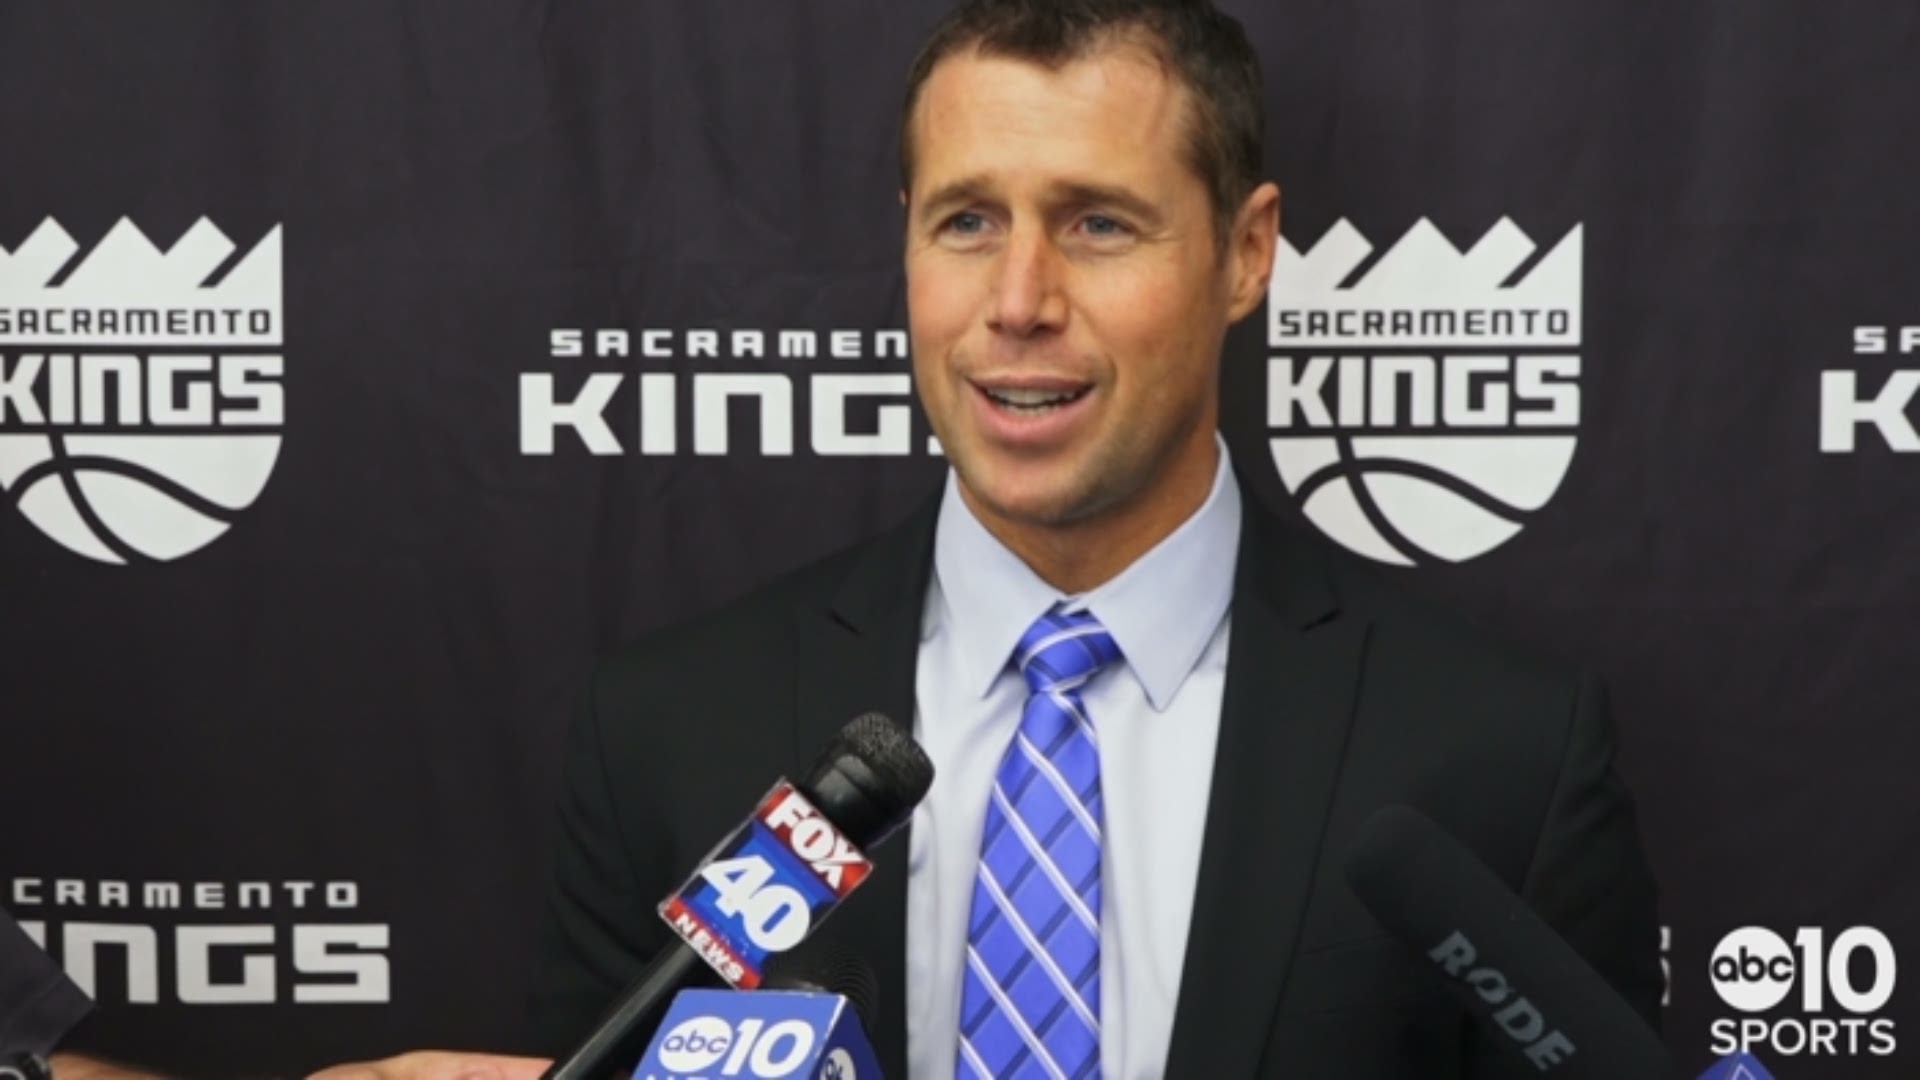 Kings head coach Dave Joerger meets with the Sacramento media on Monday to discuss the opening of training camp, wanting to play a fast paced offense and the challenges ahead for his young team.